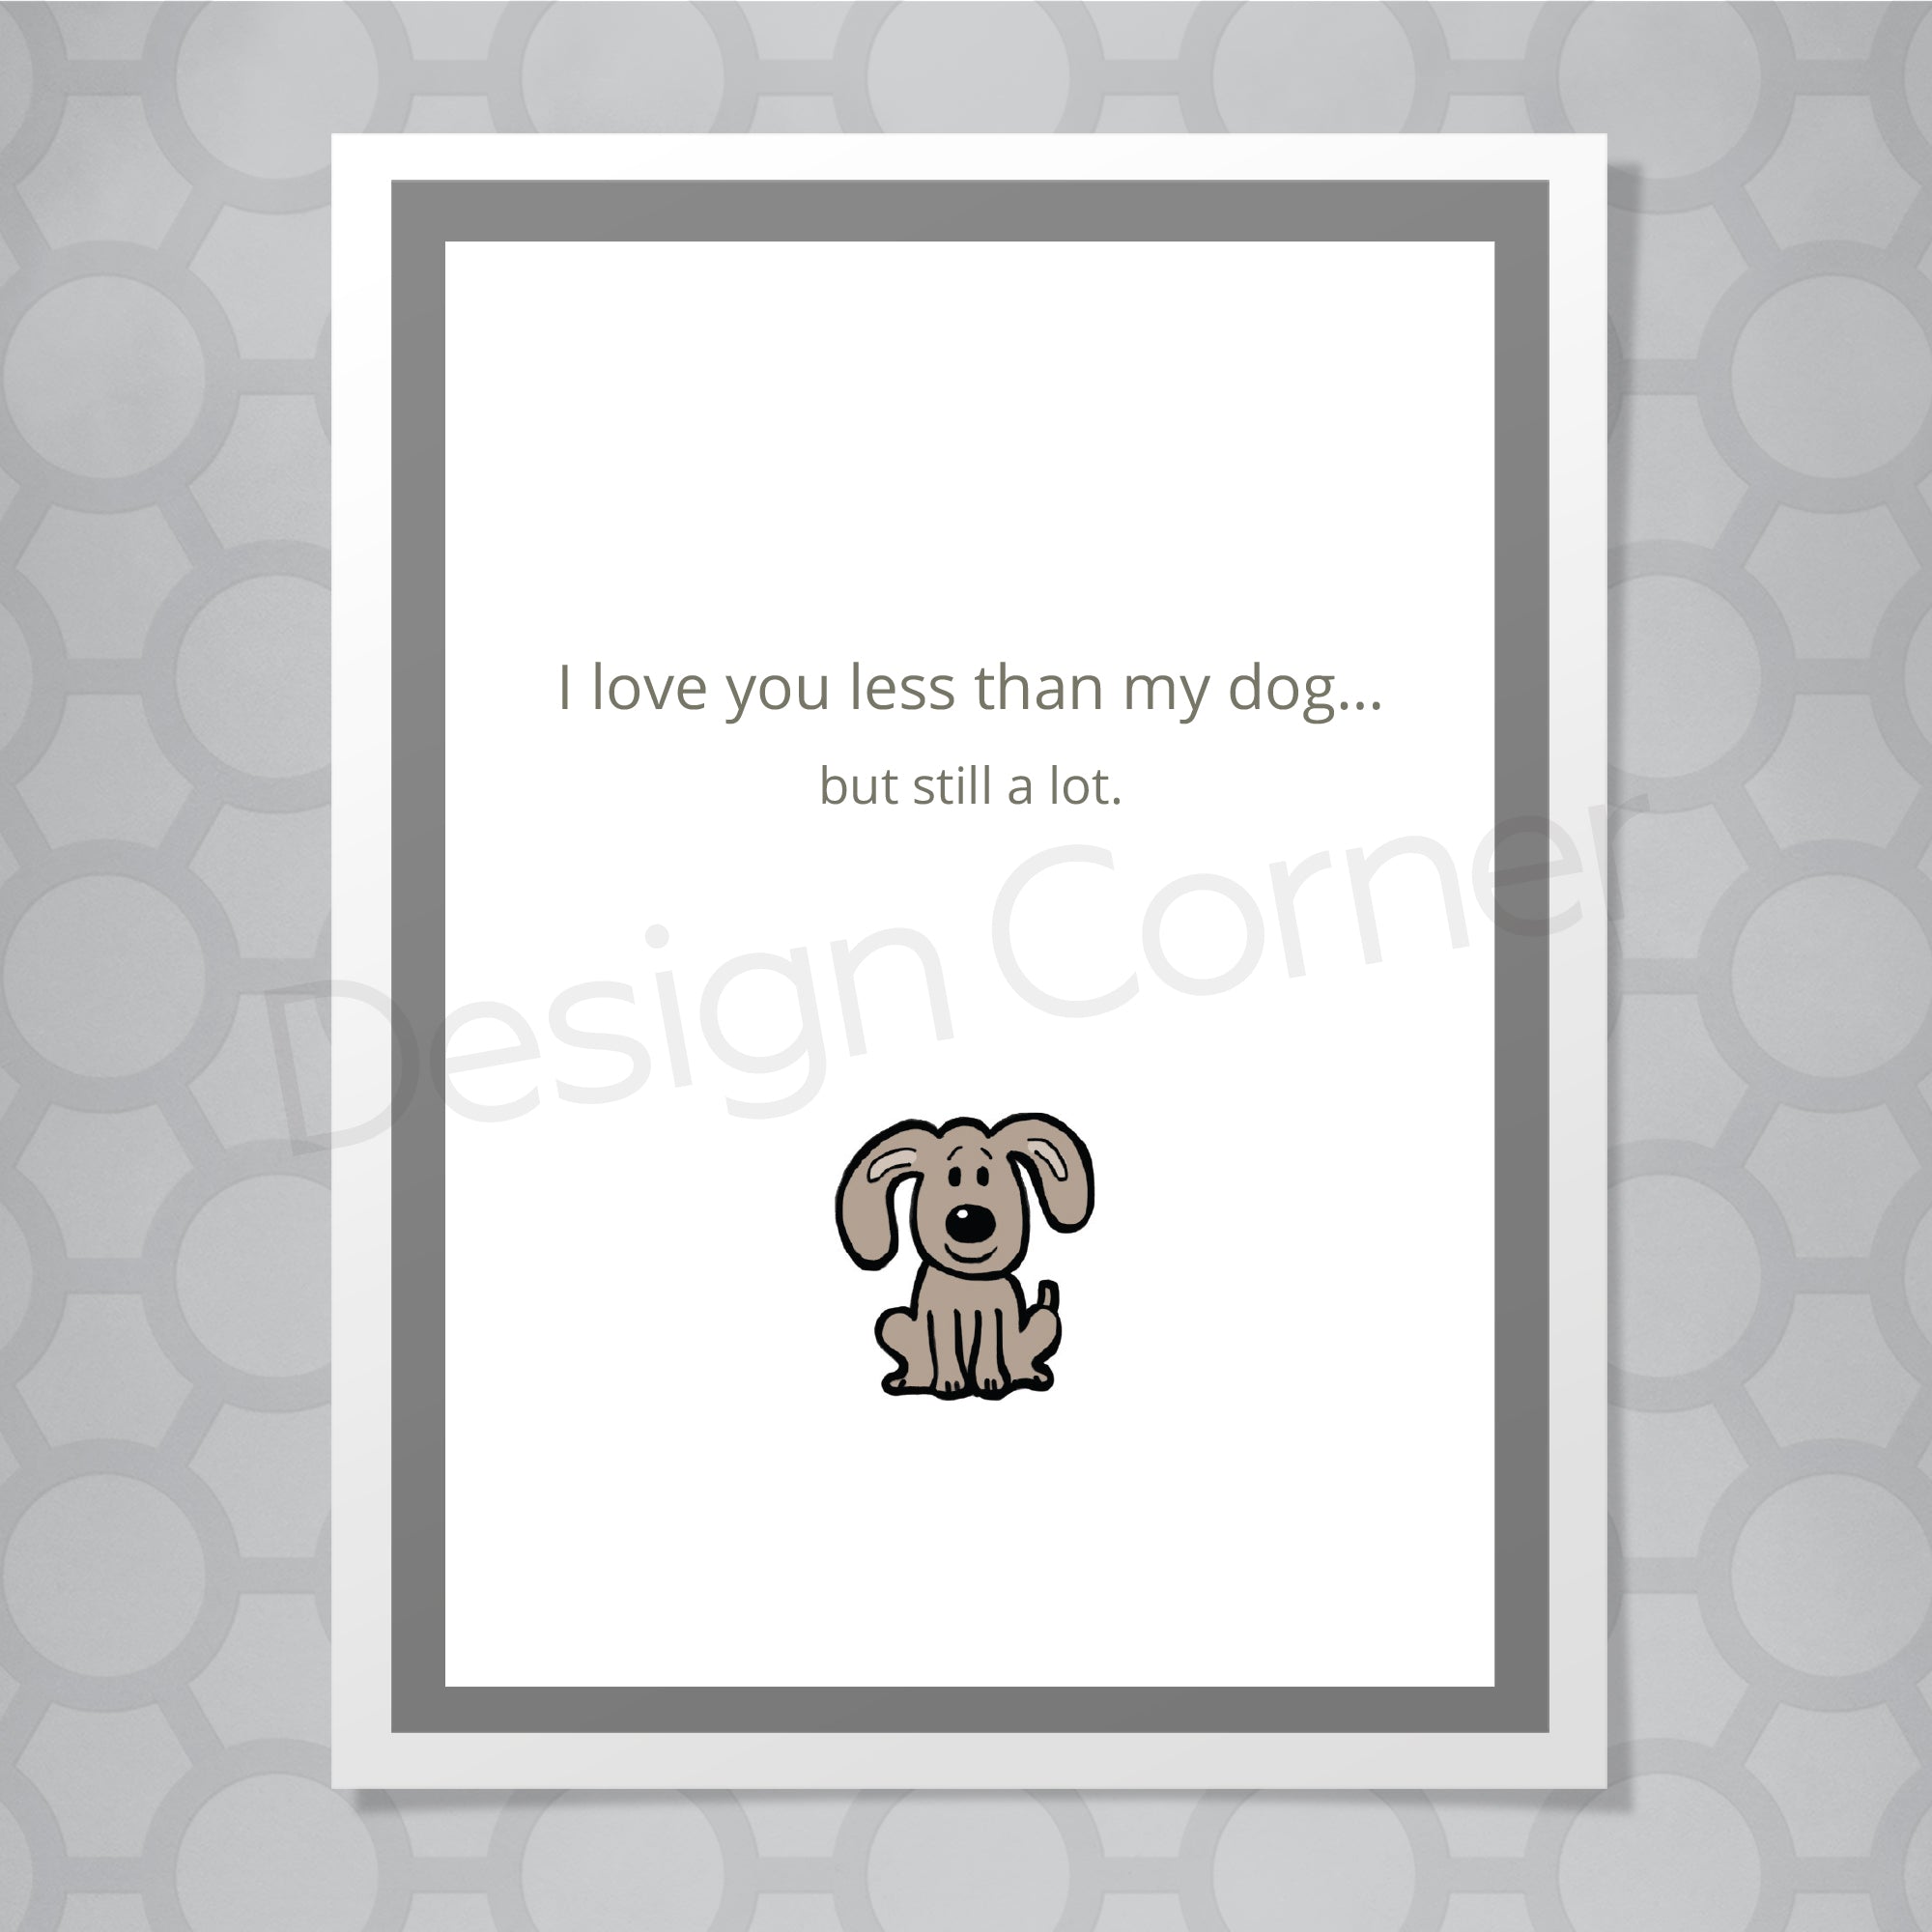 Illustration of dog on front of greeting card with caption "I love you less than my dog... but still a lot.